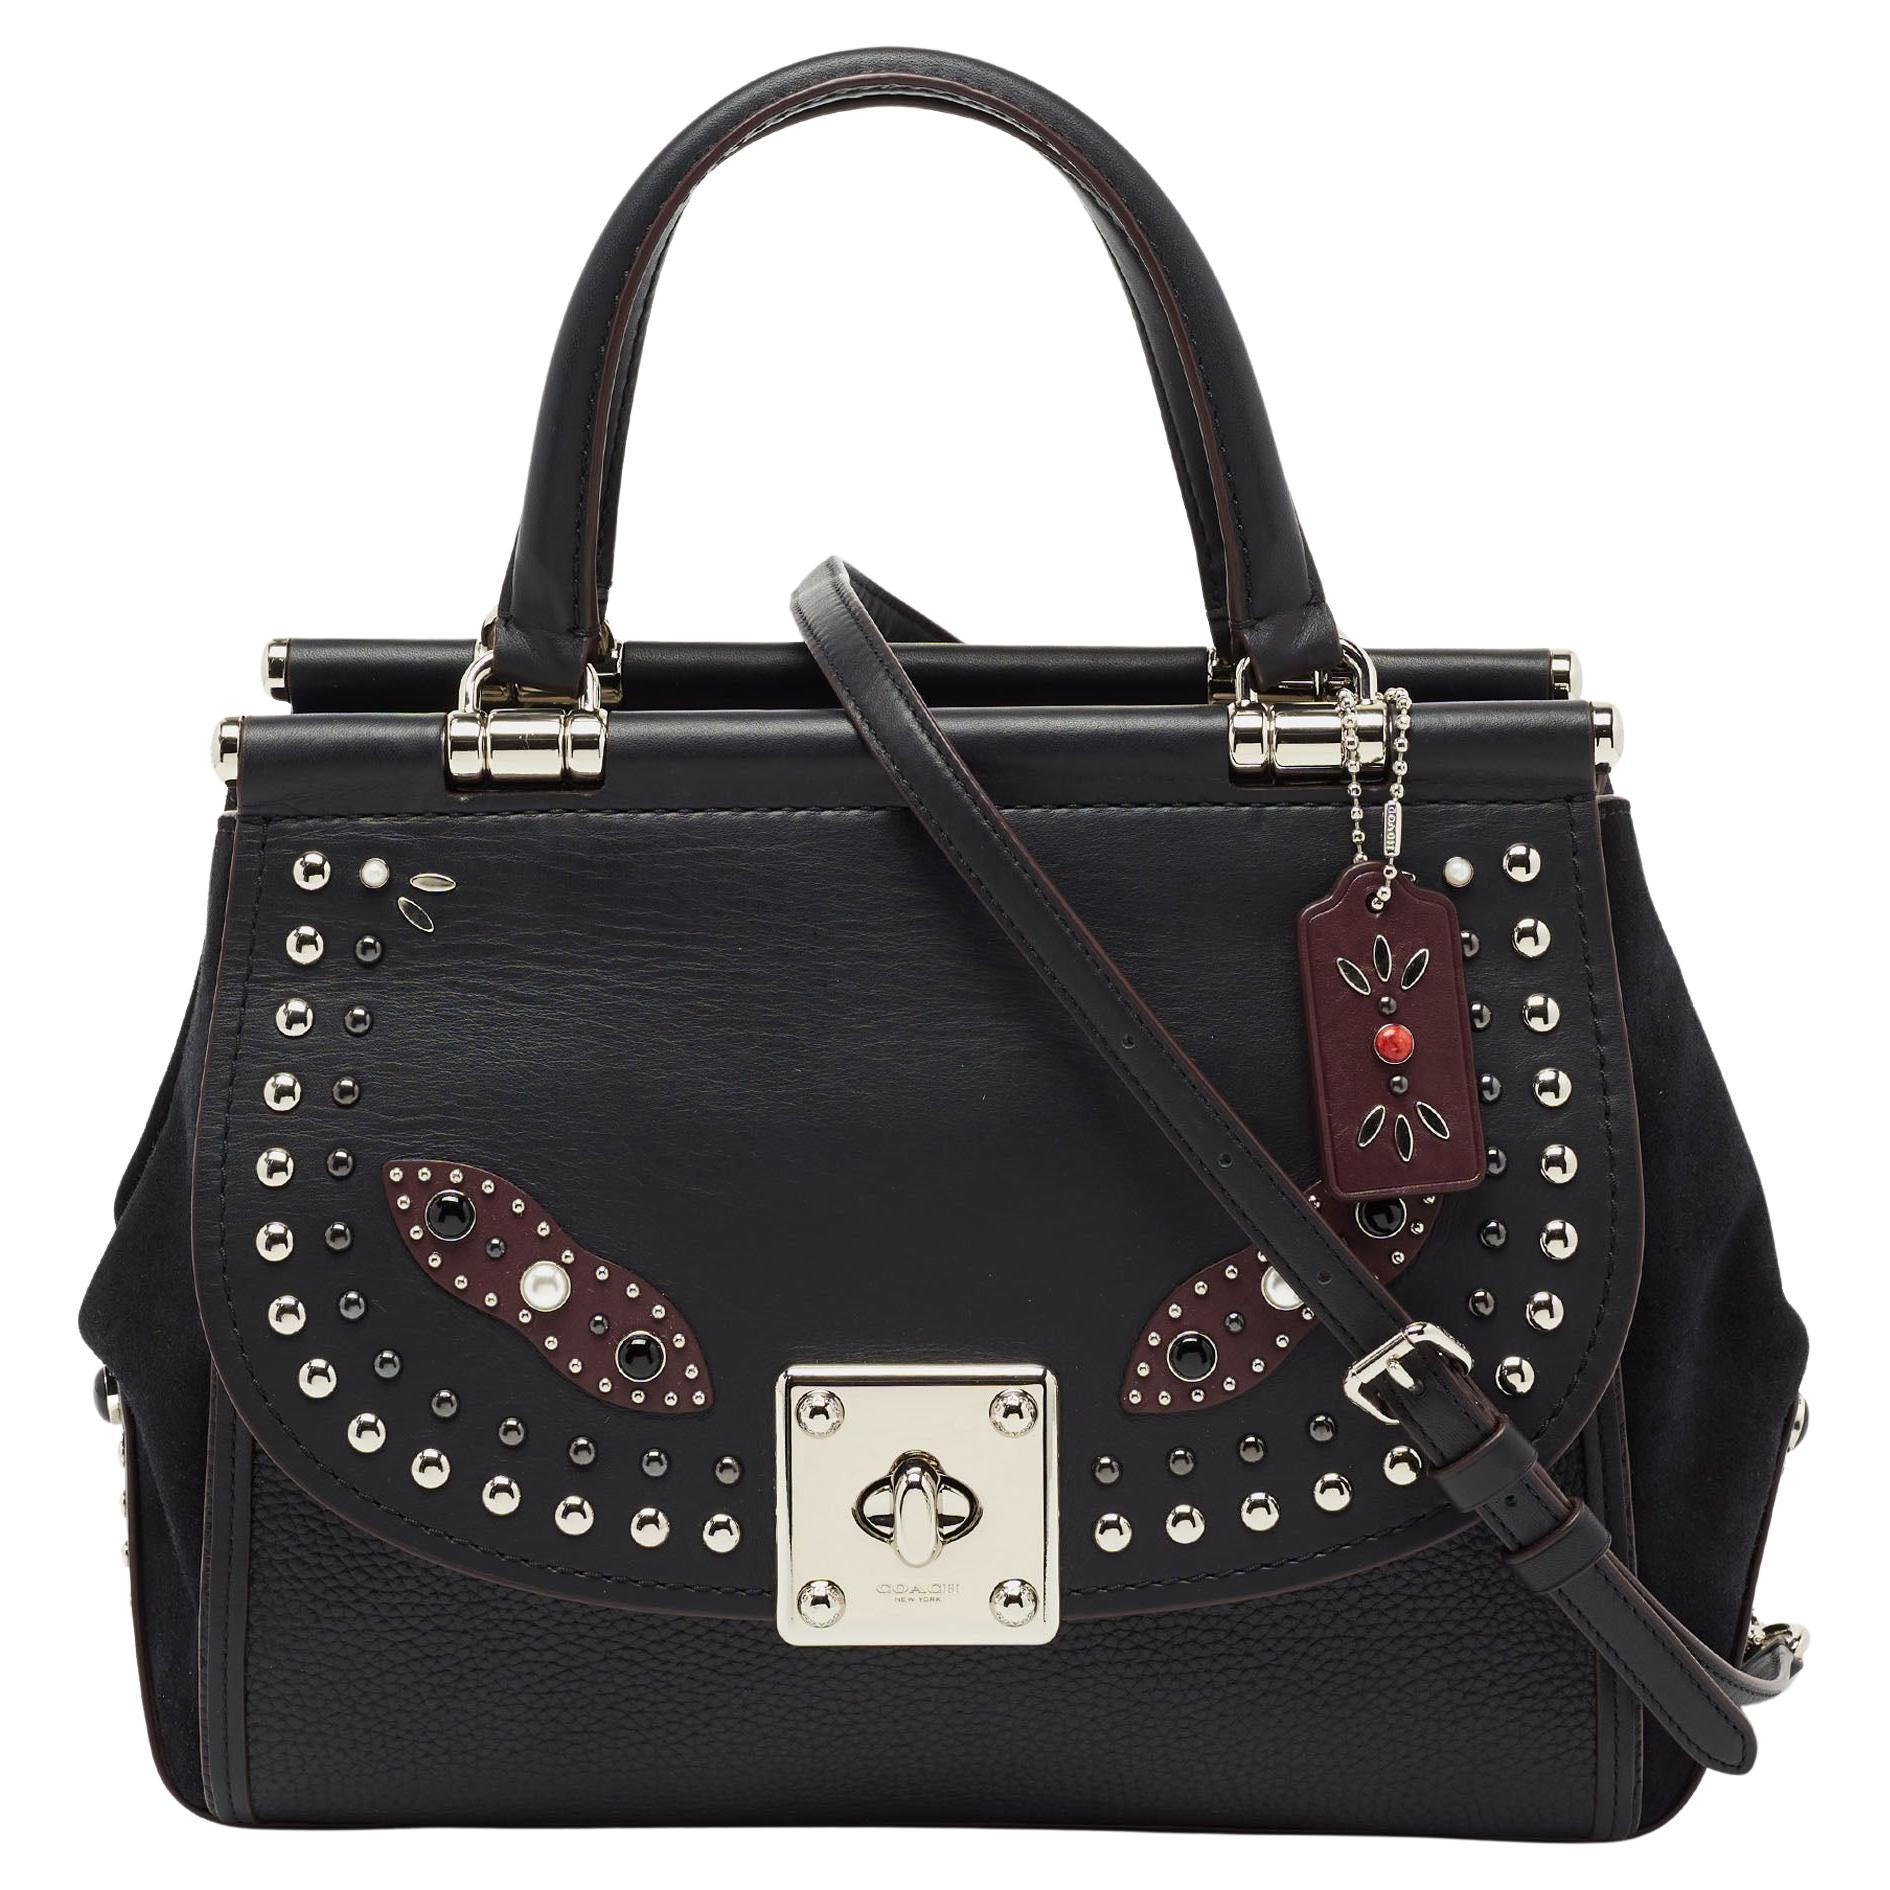 Coach Black Leather And Suede Embellished Carryall Drifter Satchel